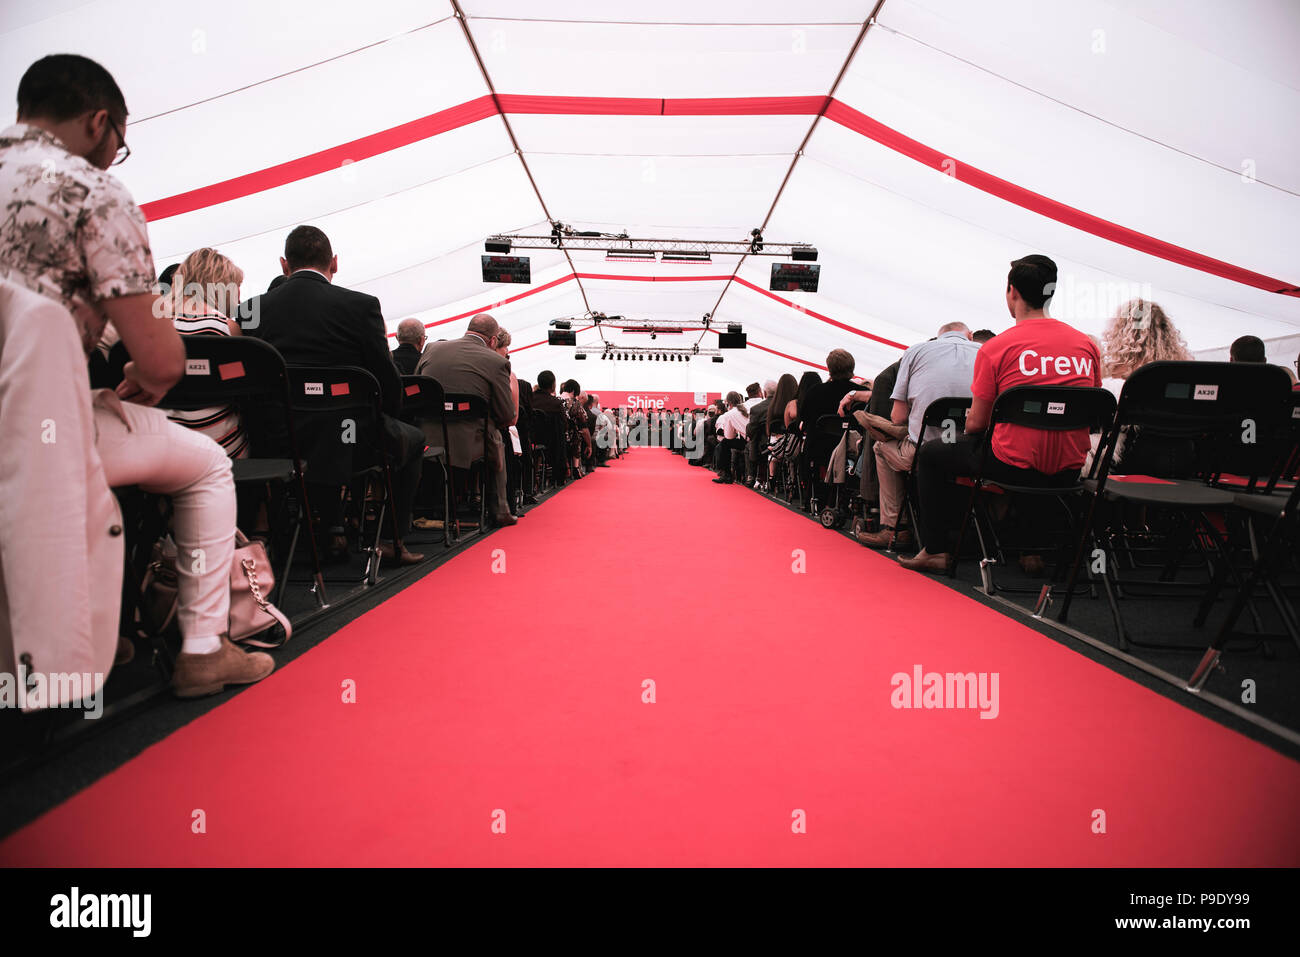 A red carpet leading up to the graduation stage with people sitting on chairs either side. Stock Photo